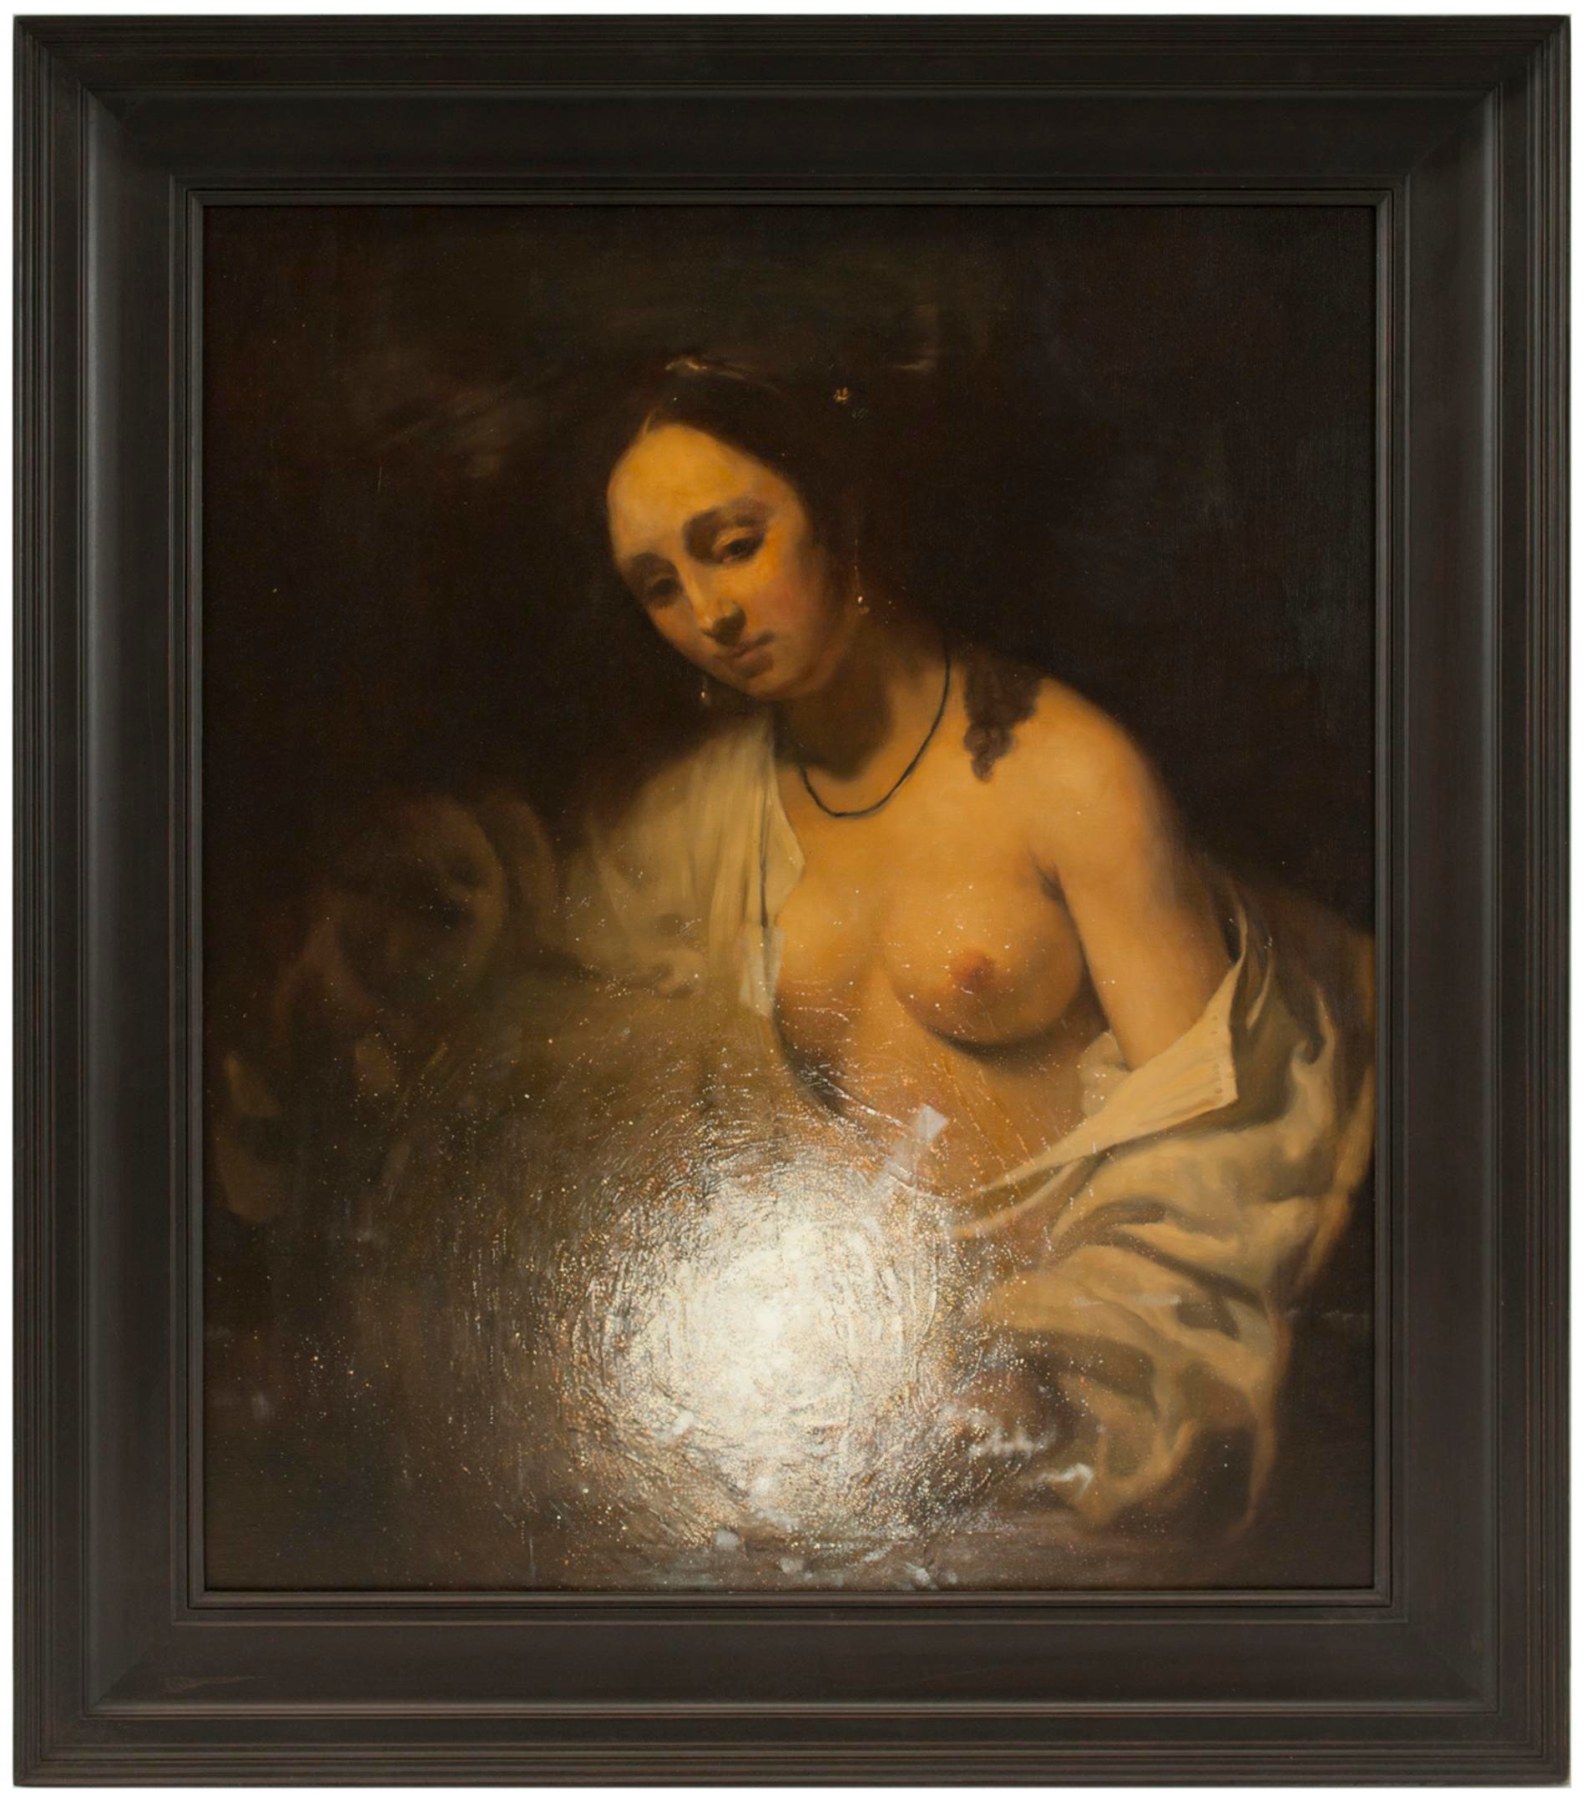 classical style painting with a near naked woman holding an object emitting a great source of light